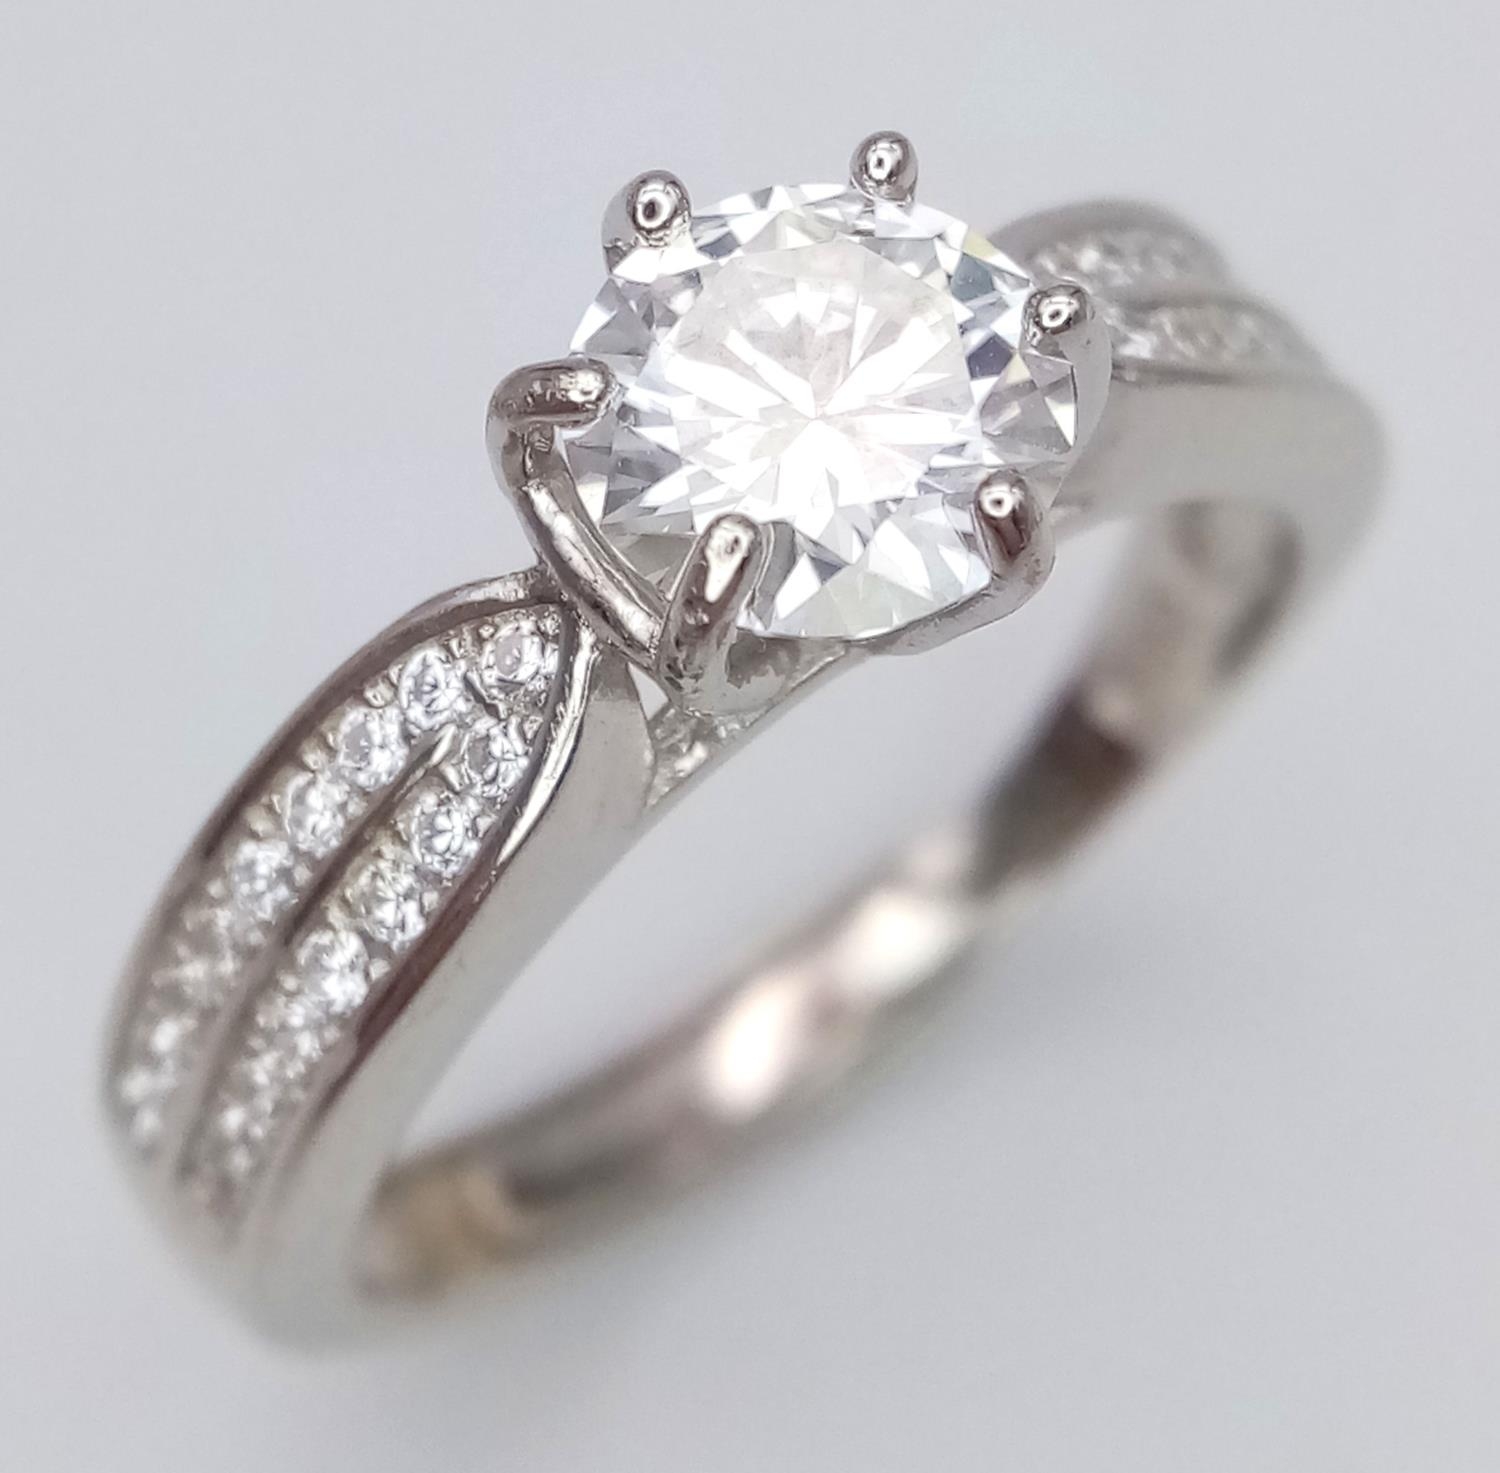 A 1ct Moissanite 925 Silver Ring. Size O. Comes with a GRA certificate. - Image 2 of 5